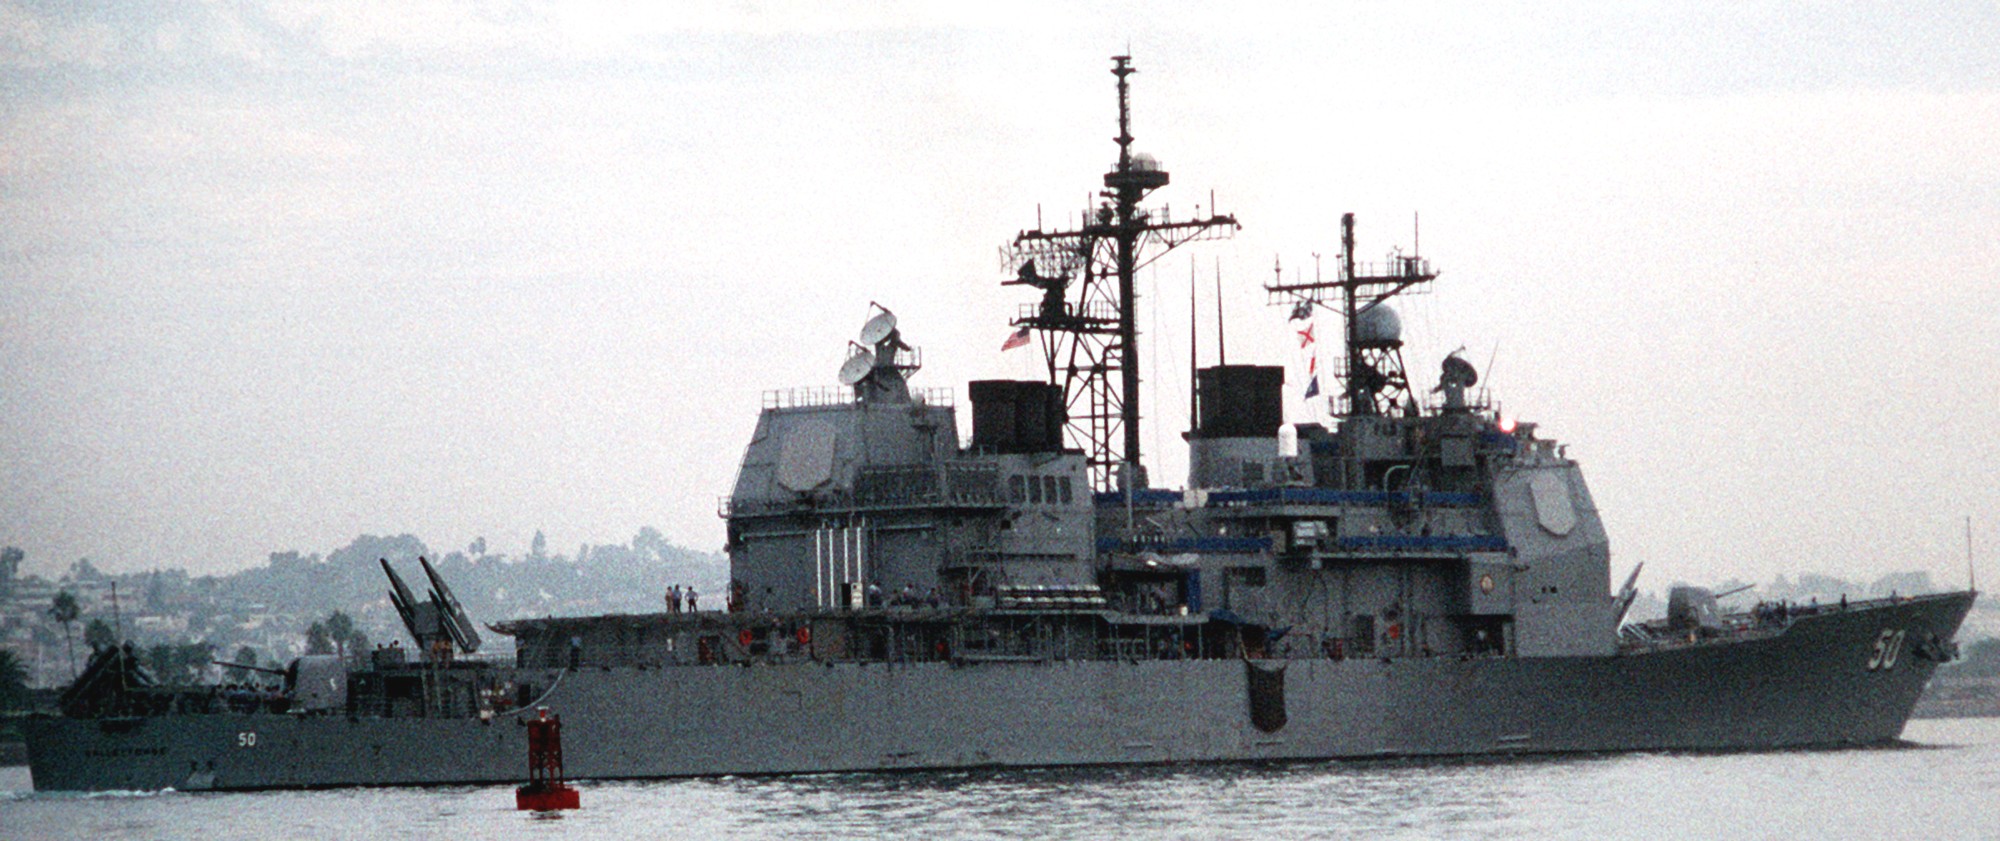 cg-50 uss valley forge ticonderoga class guided missile cruiser aegis us navy pacex san diego 42